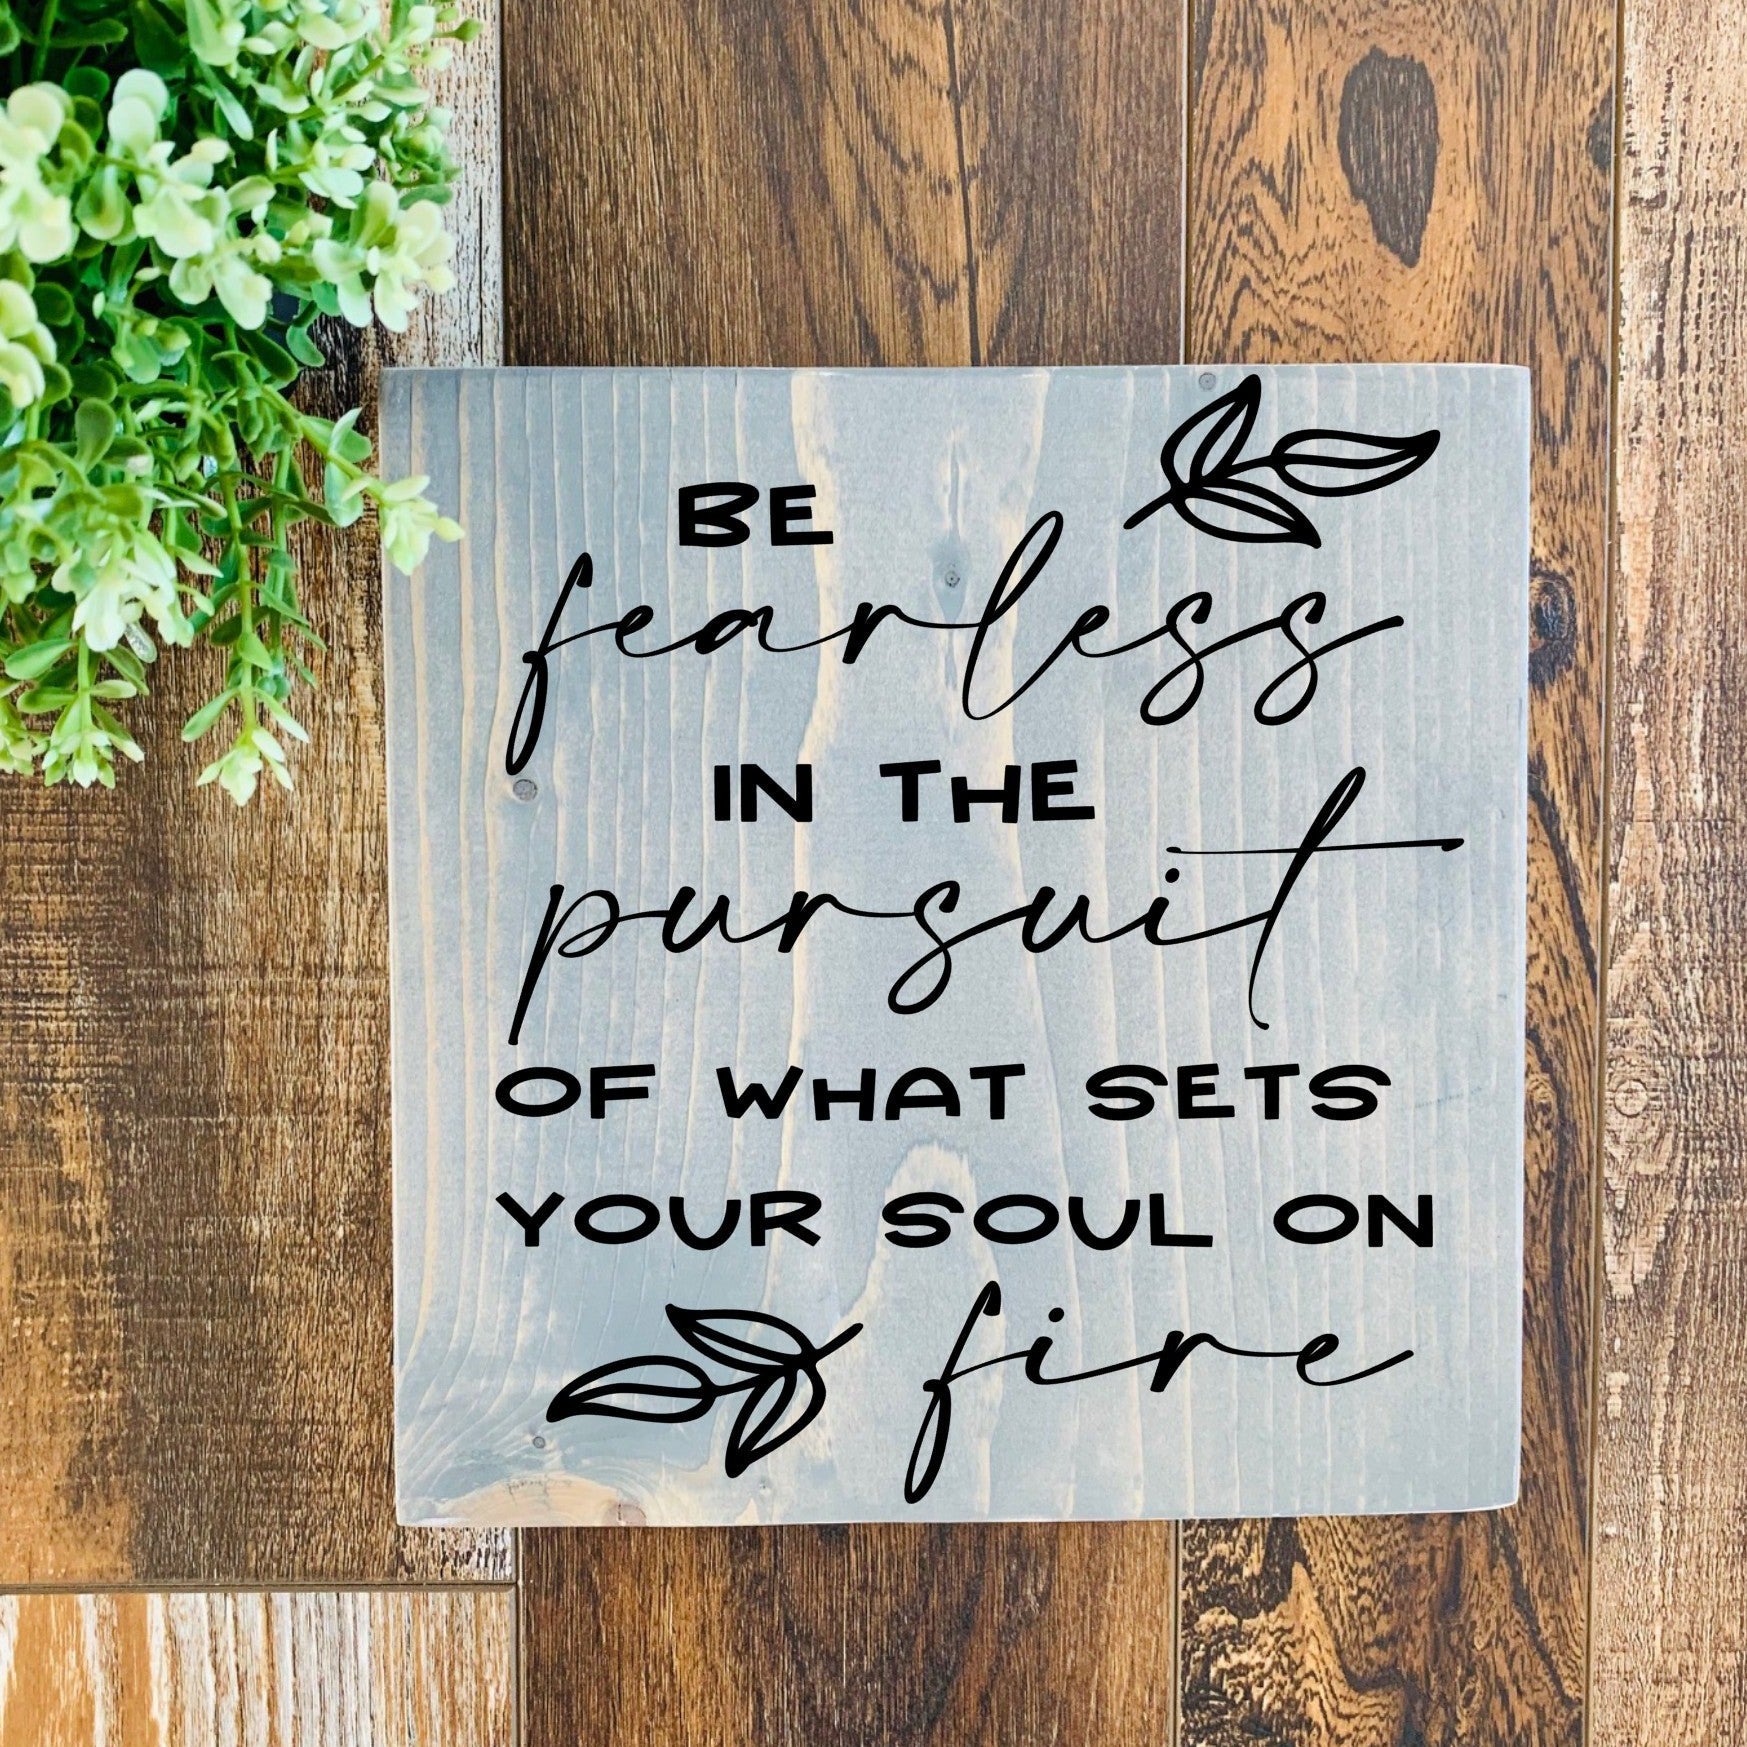 Be Fearless in the pursuit of what sets your soul on fire, Wood Plank Wall  Sign